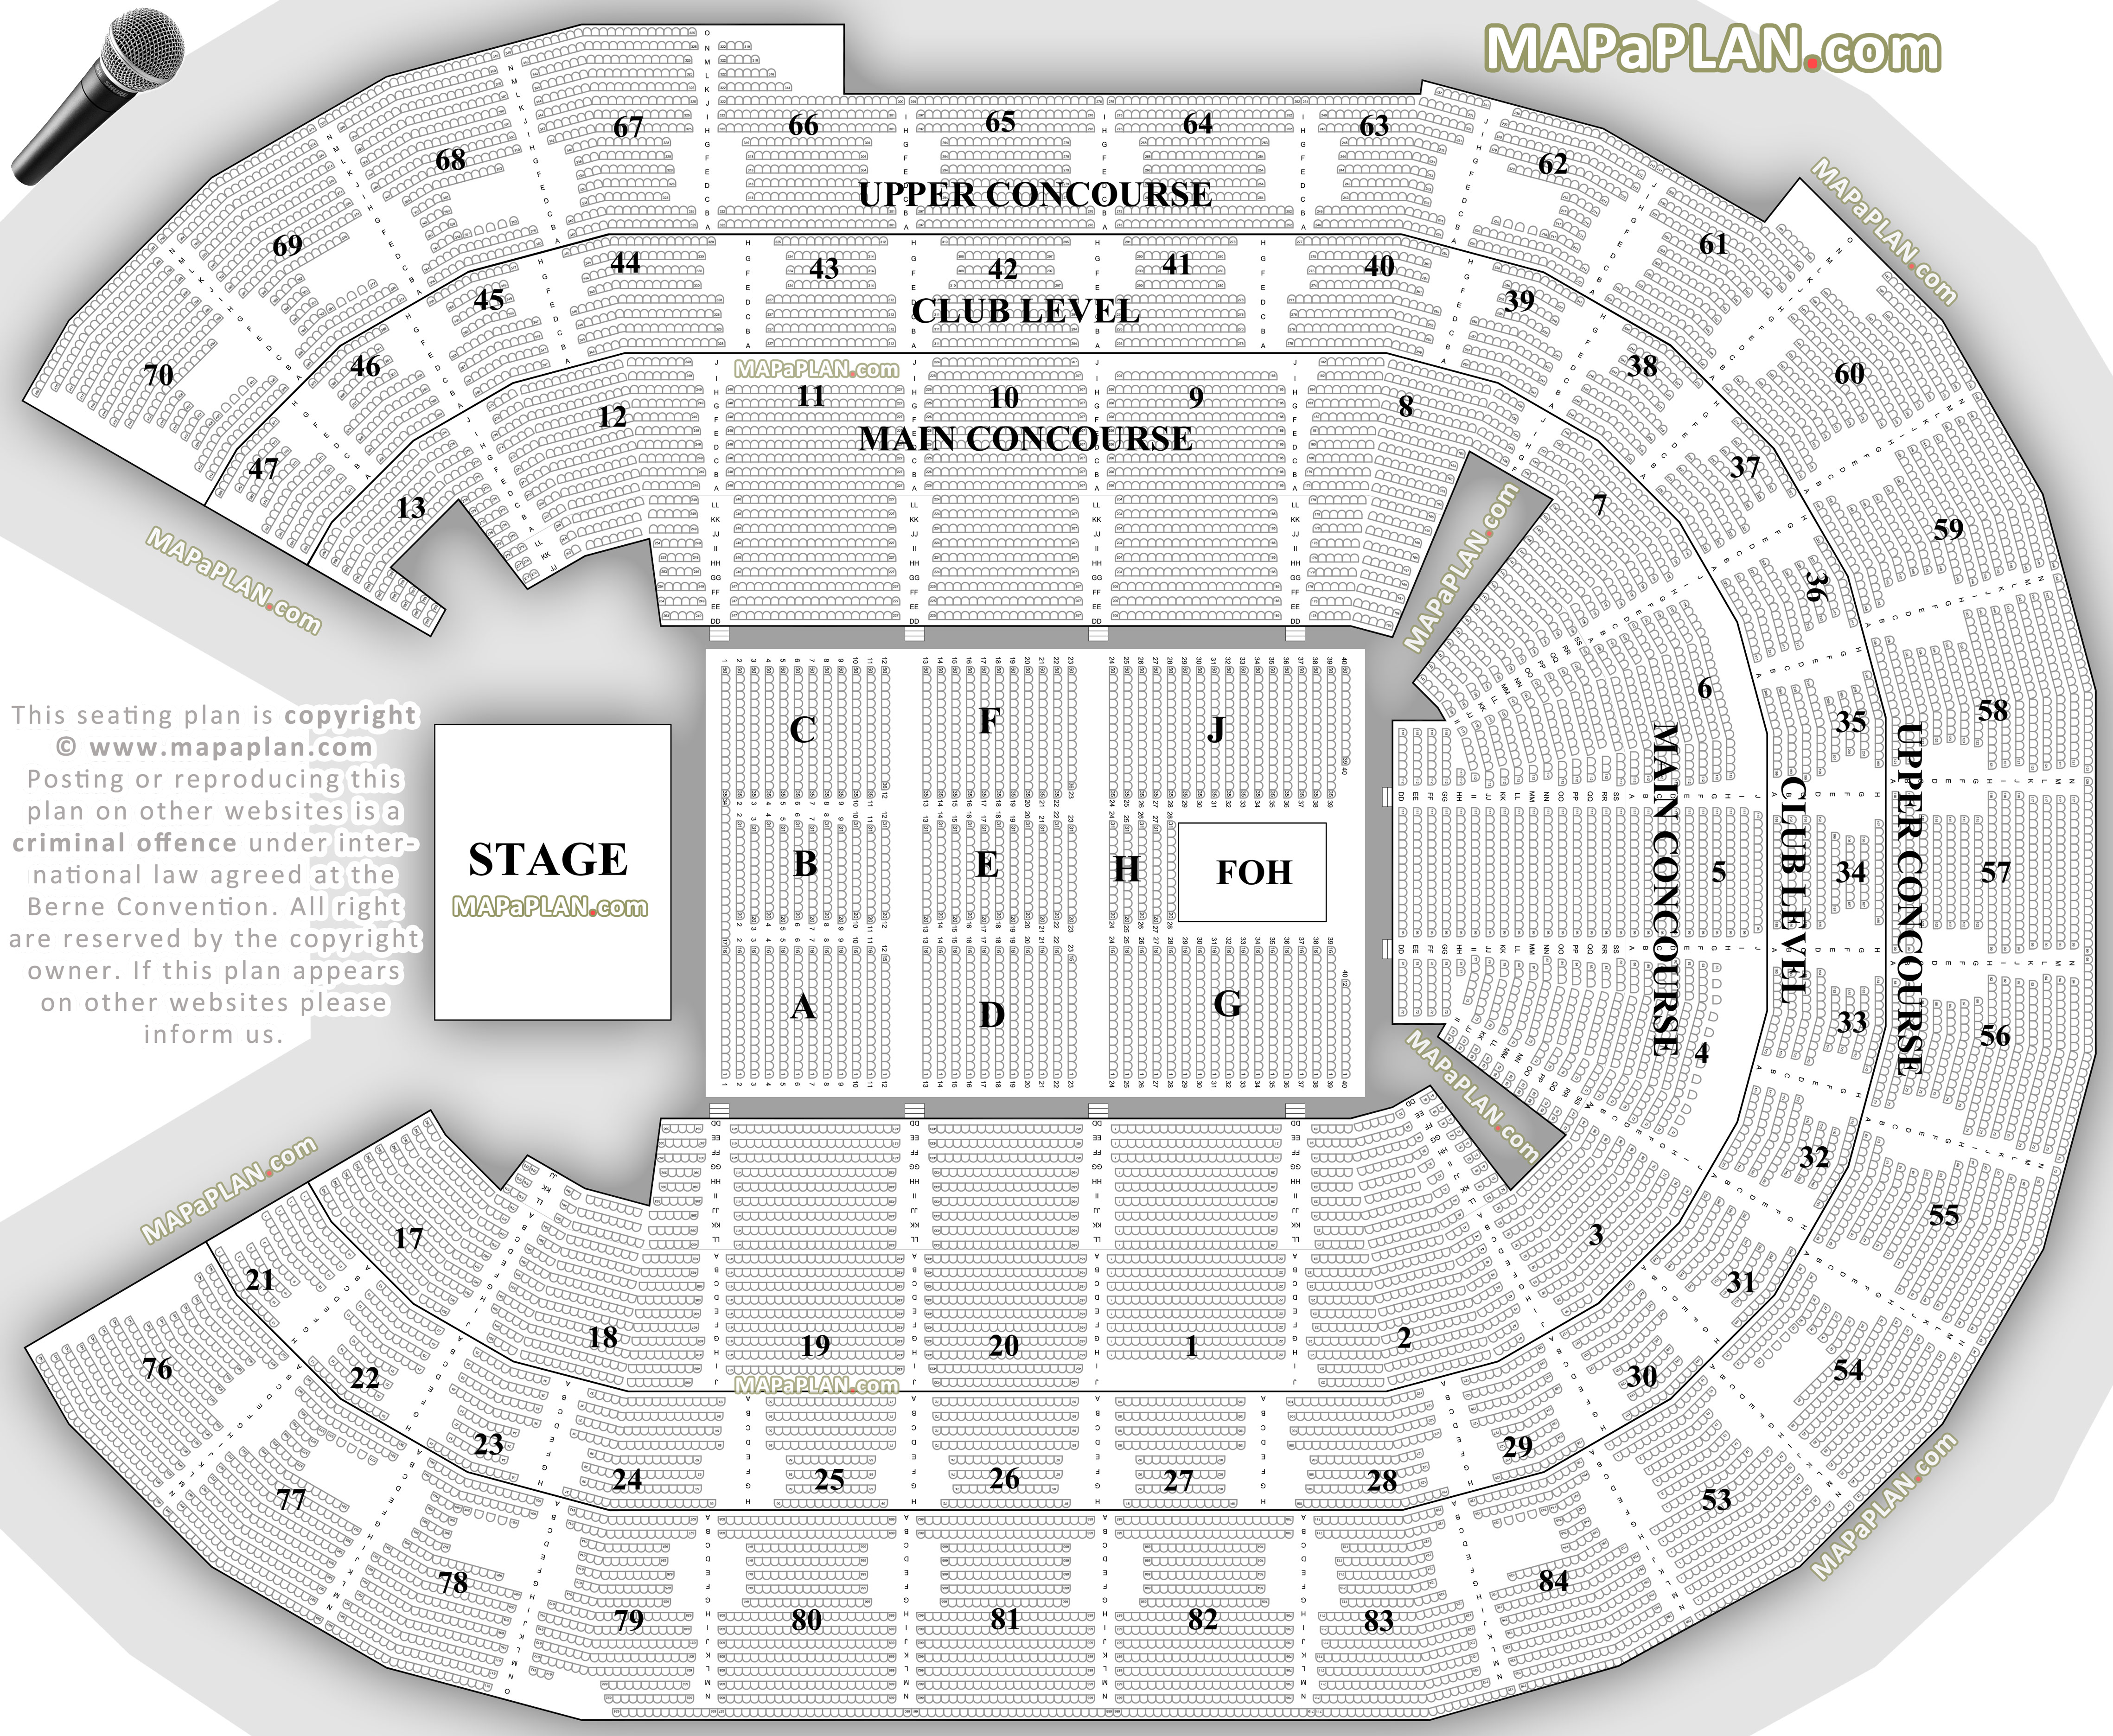 Detailed seat numebers row lettering concert chart with first second third elevation sections Sydney Allphones Arena seating chart